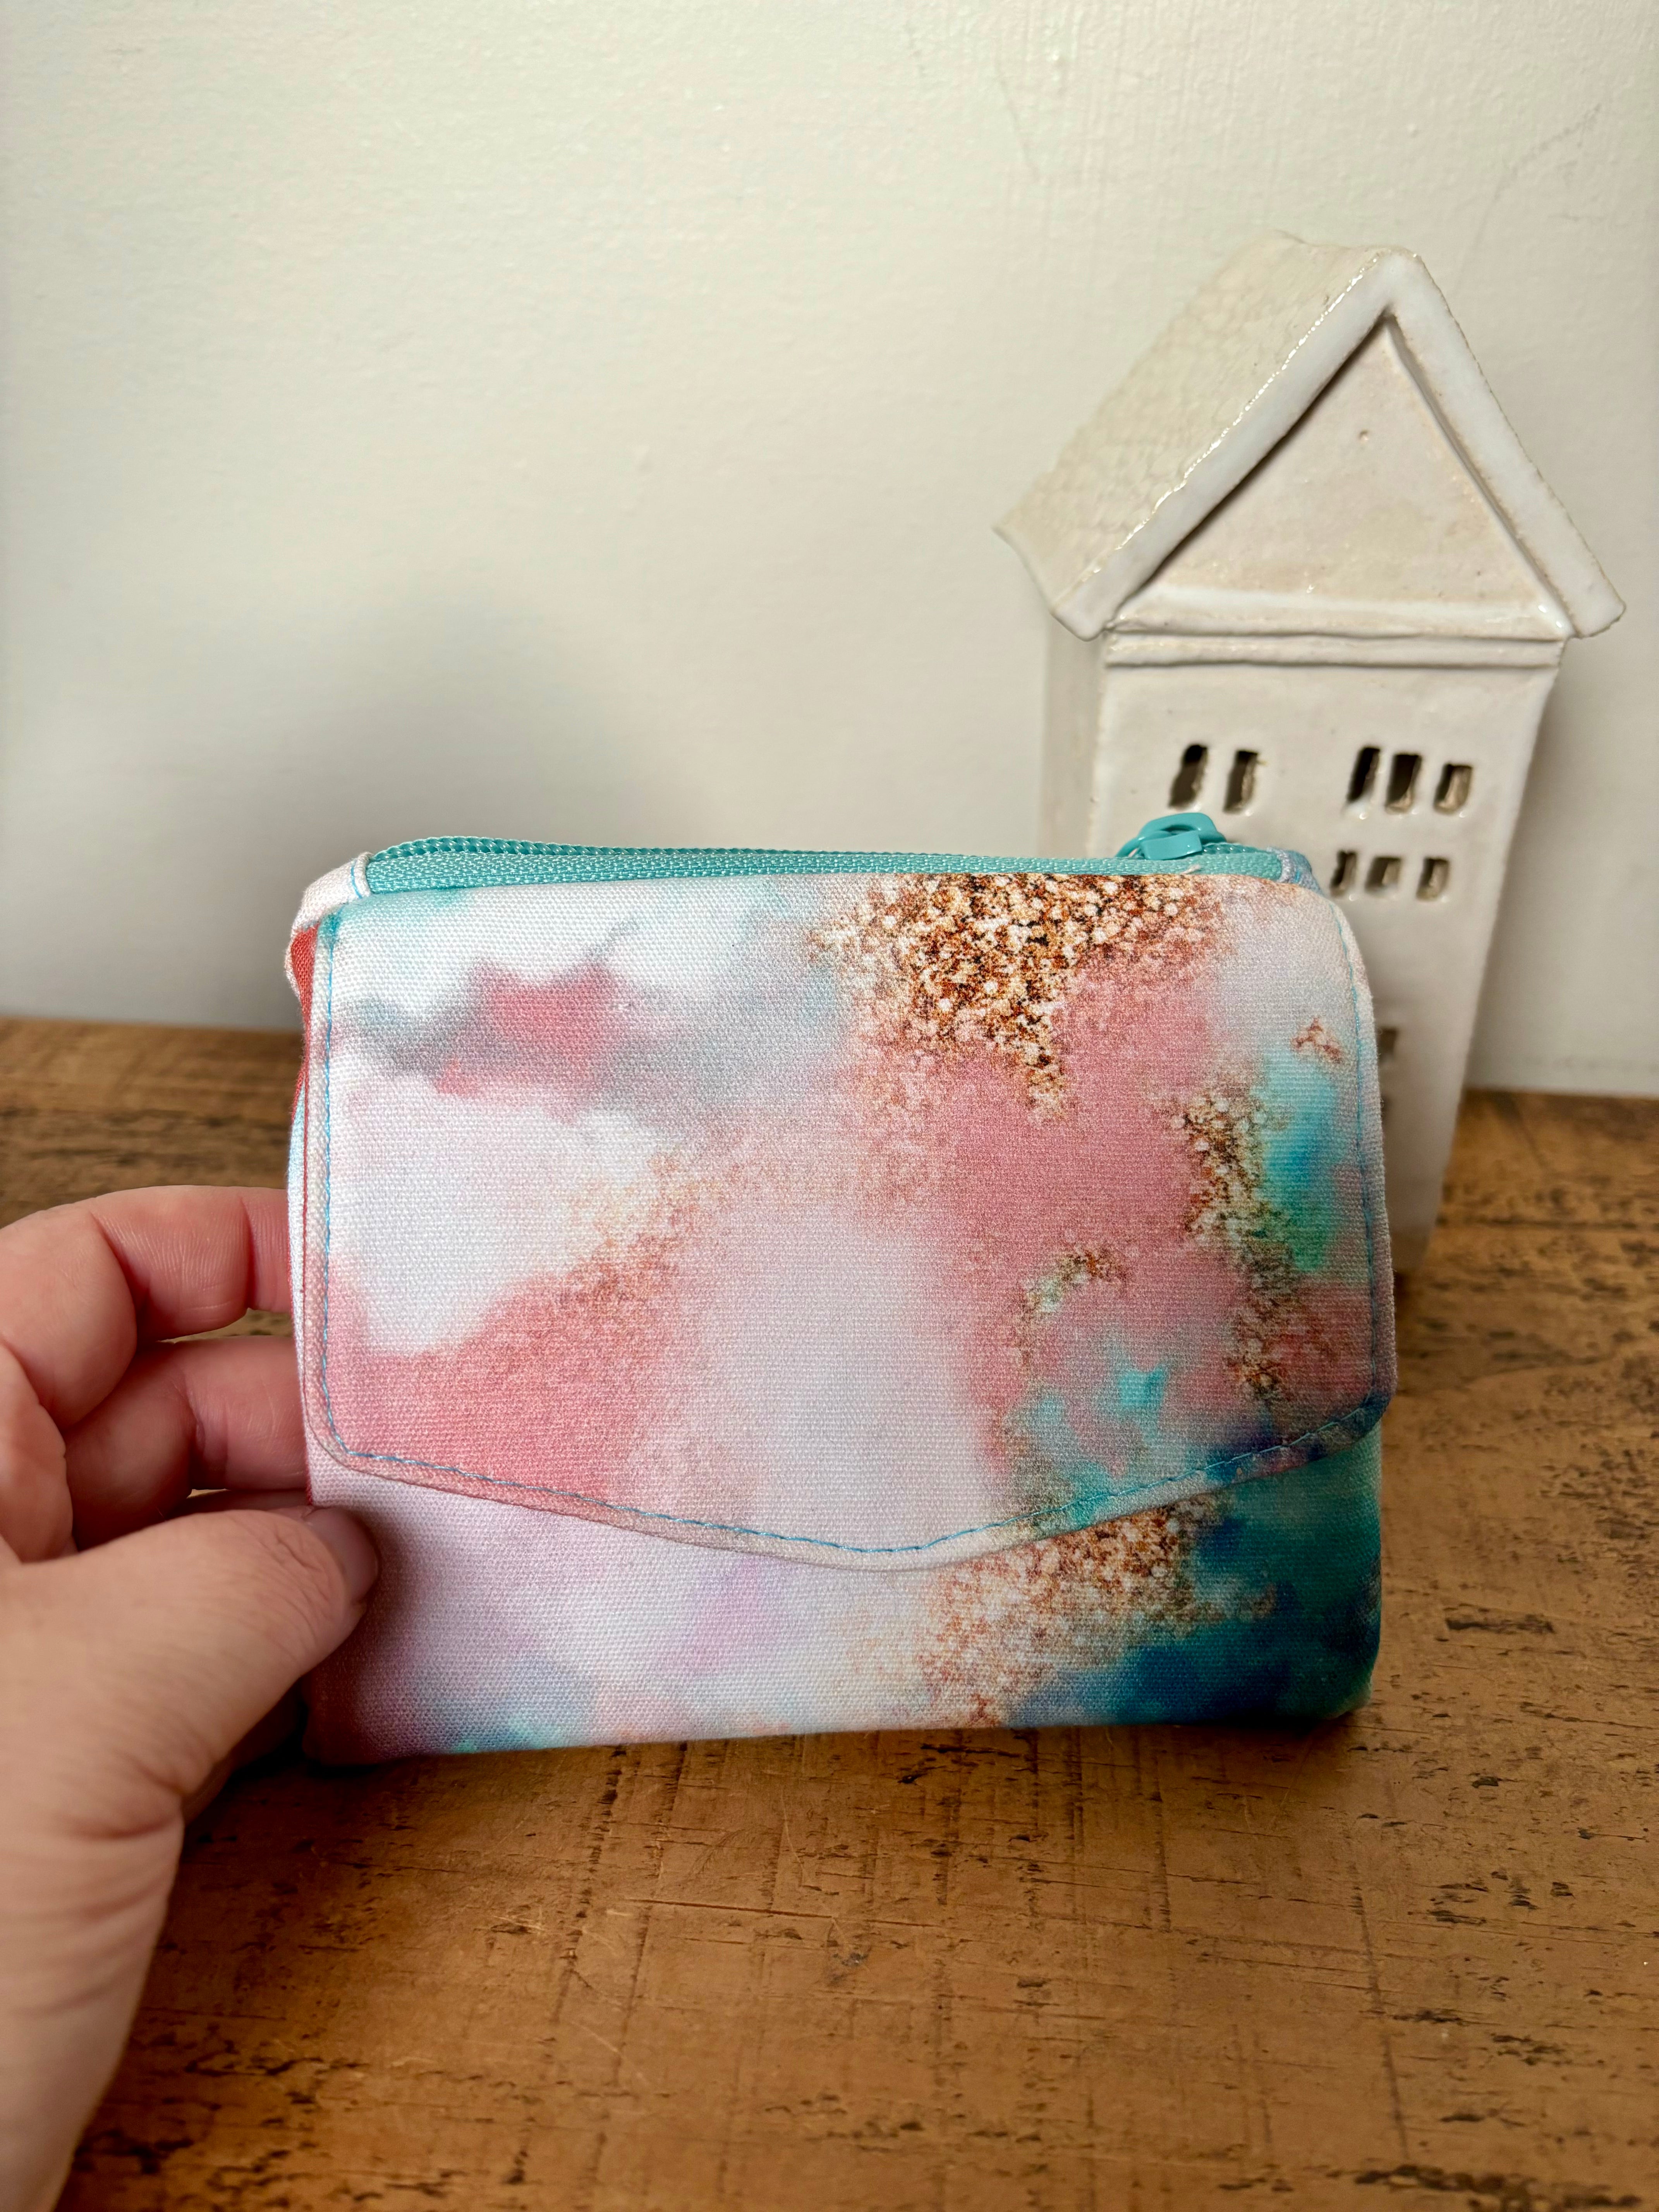 Limited Edition Prism Plum Compact Purse with Sugar Plum Sparkle, with icy turquoise blue, gold and pink hues.